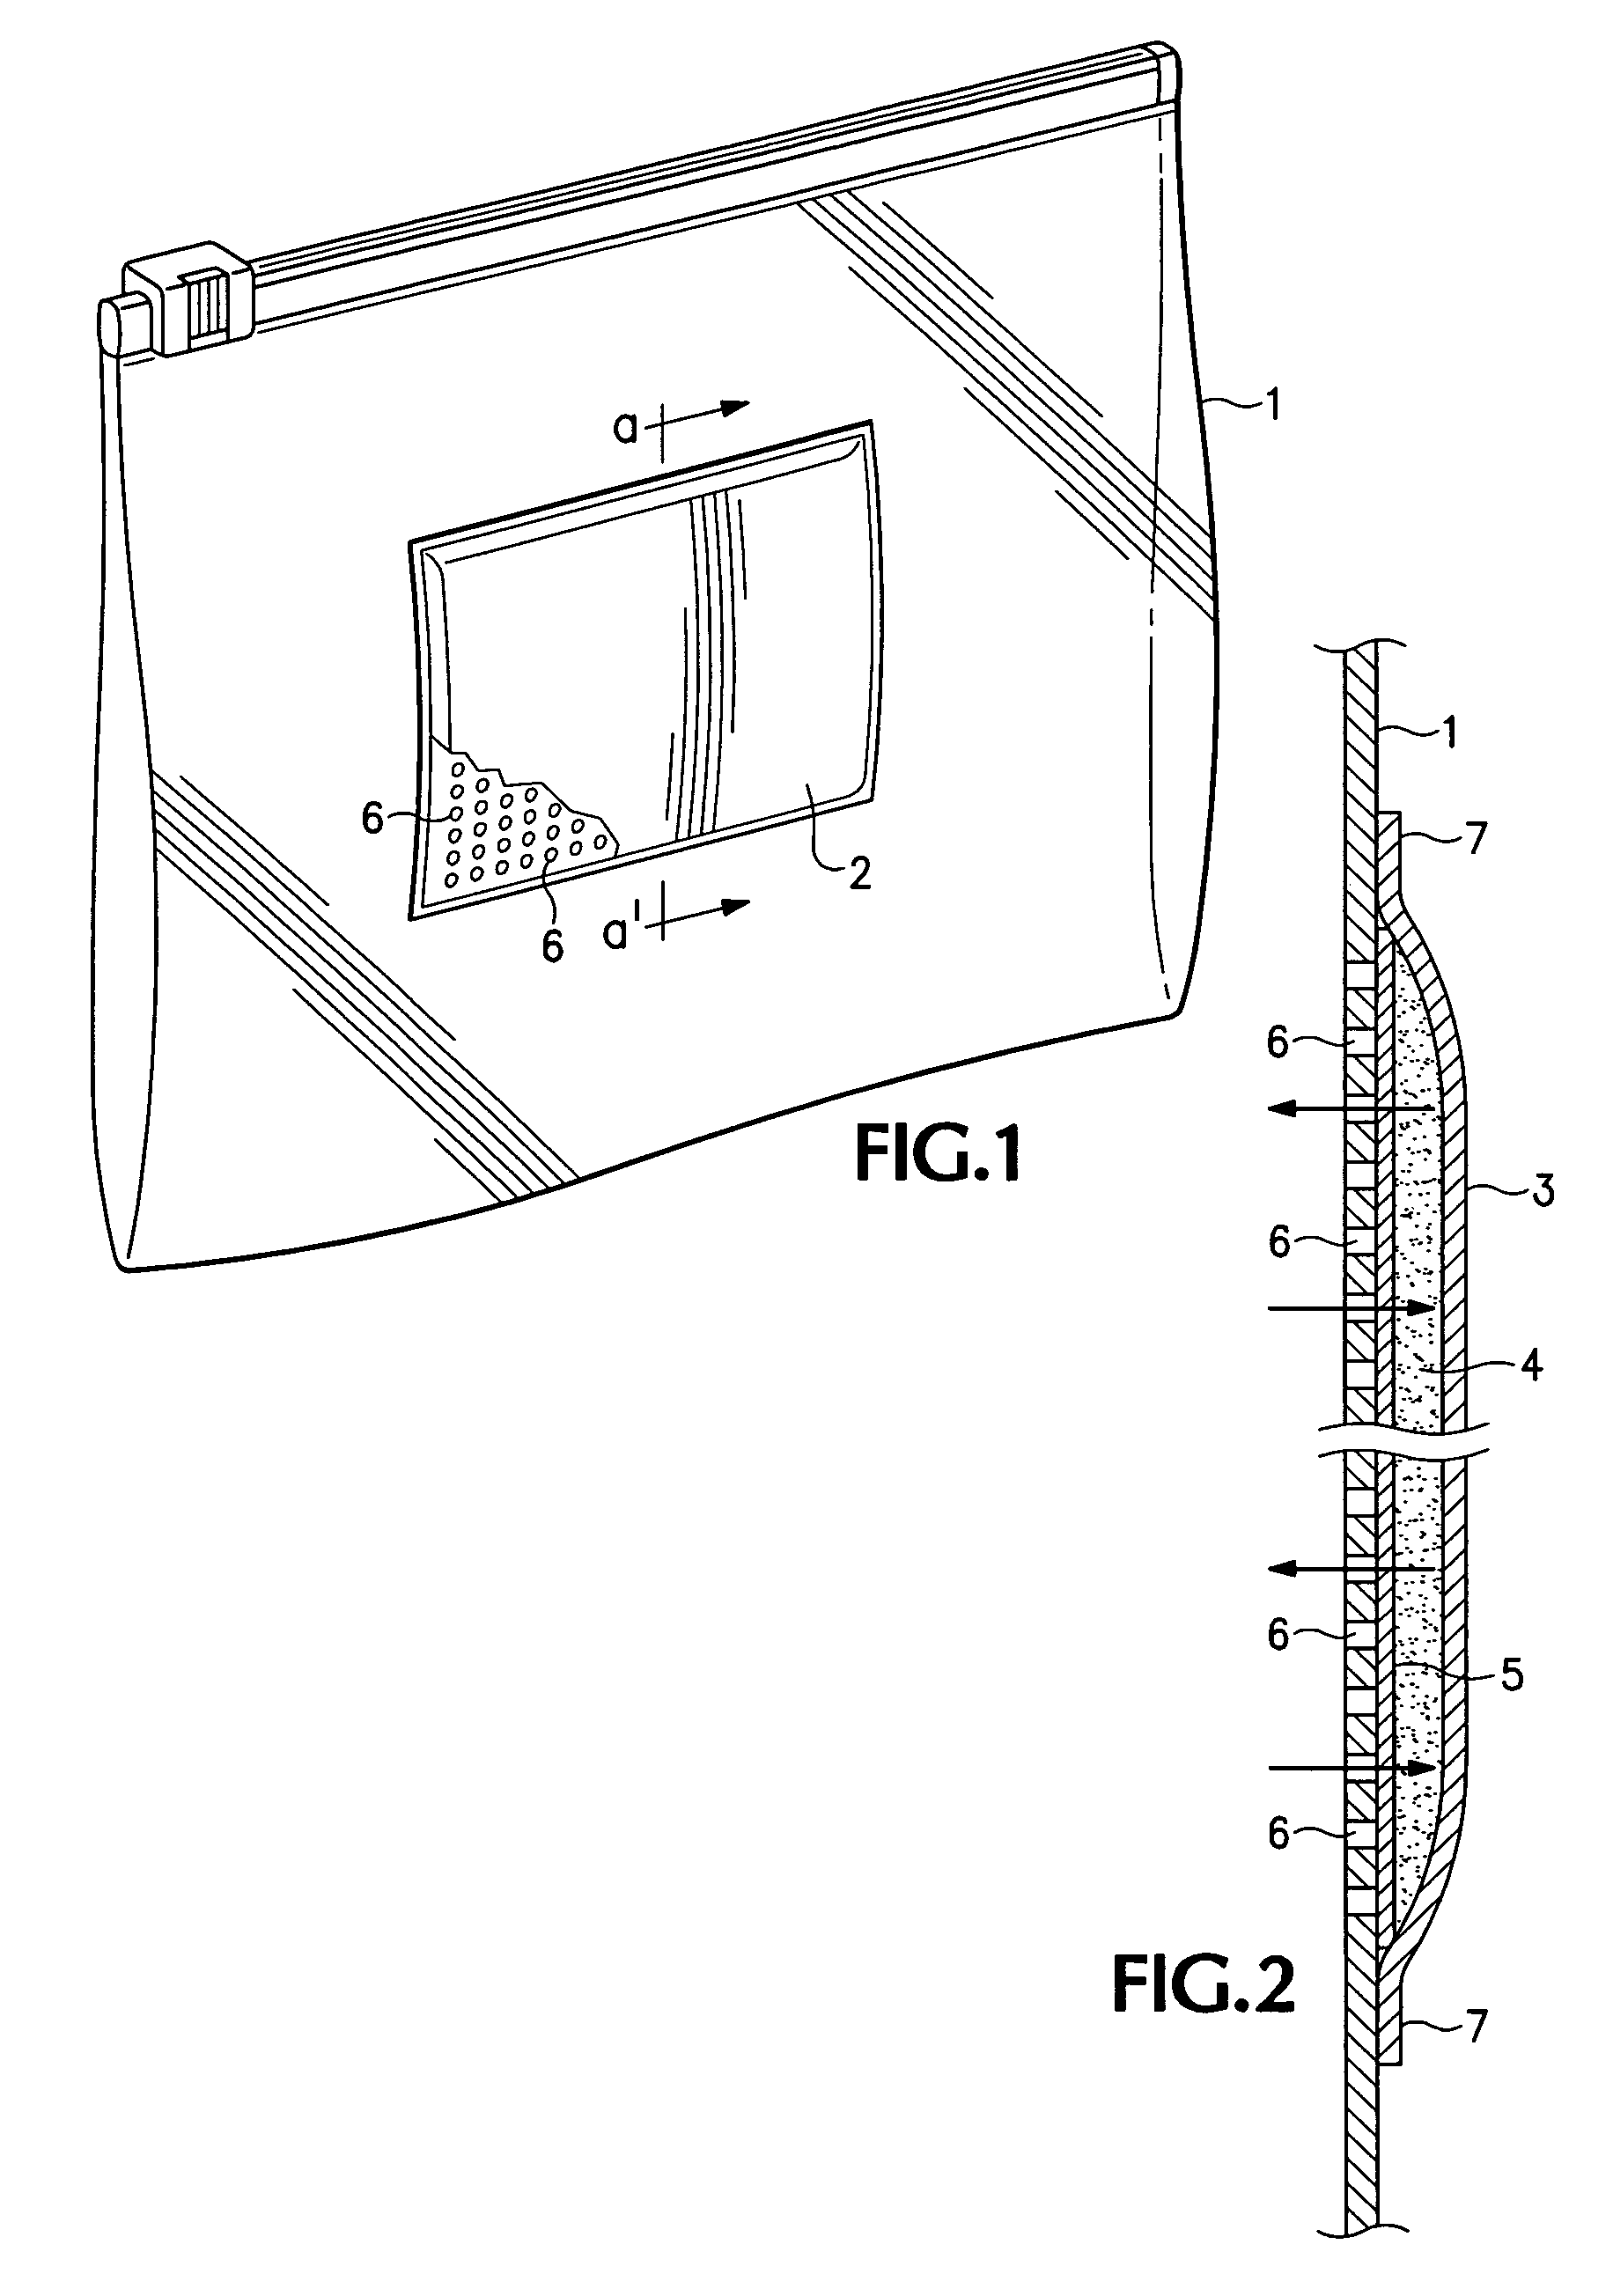 Packaging system for preserving perishable items